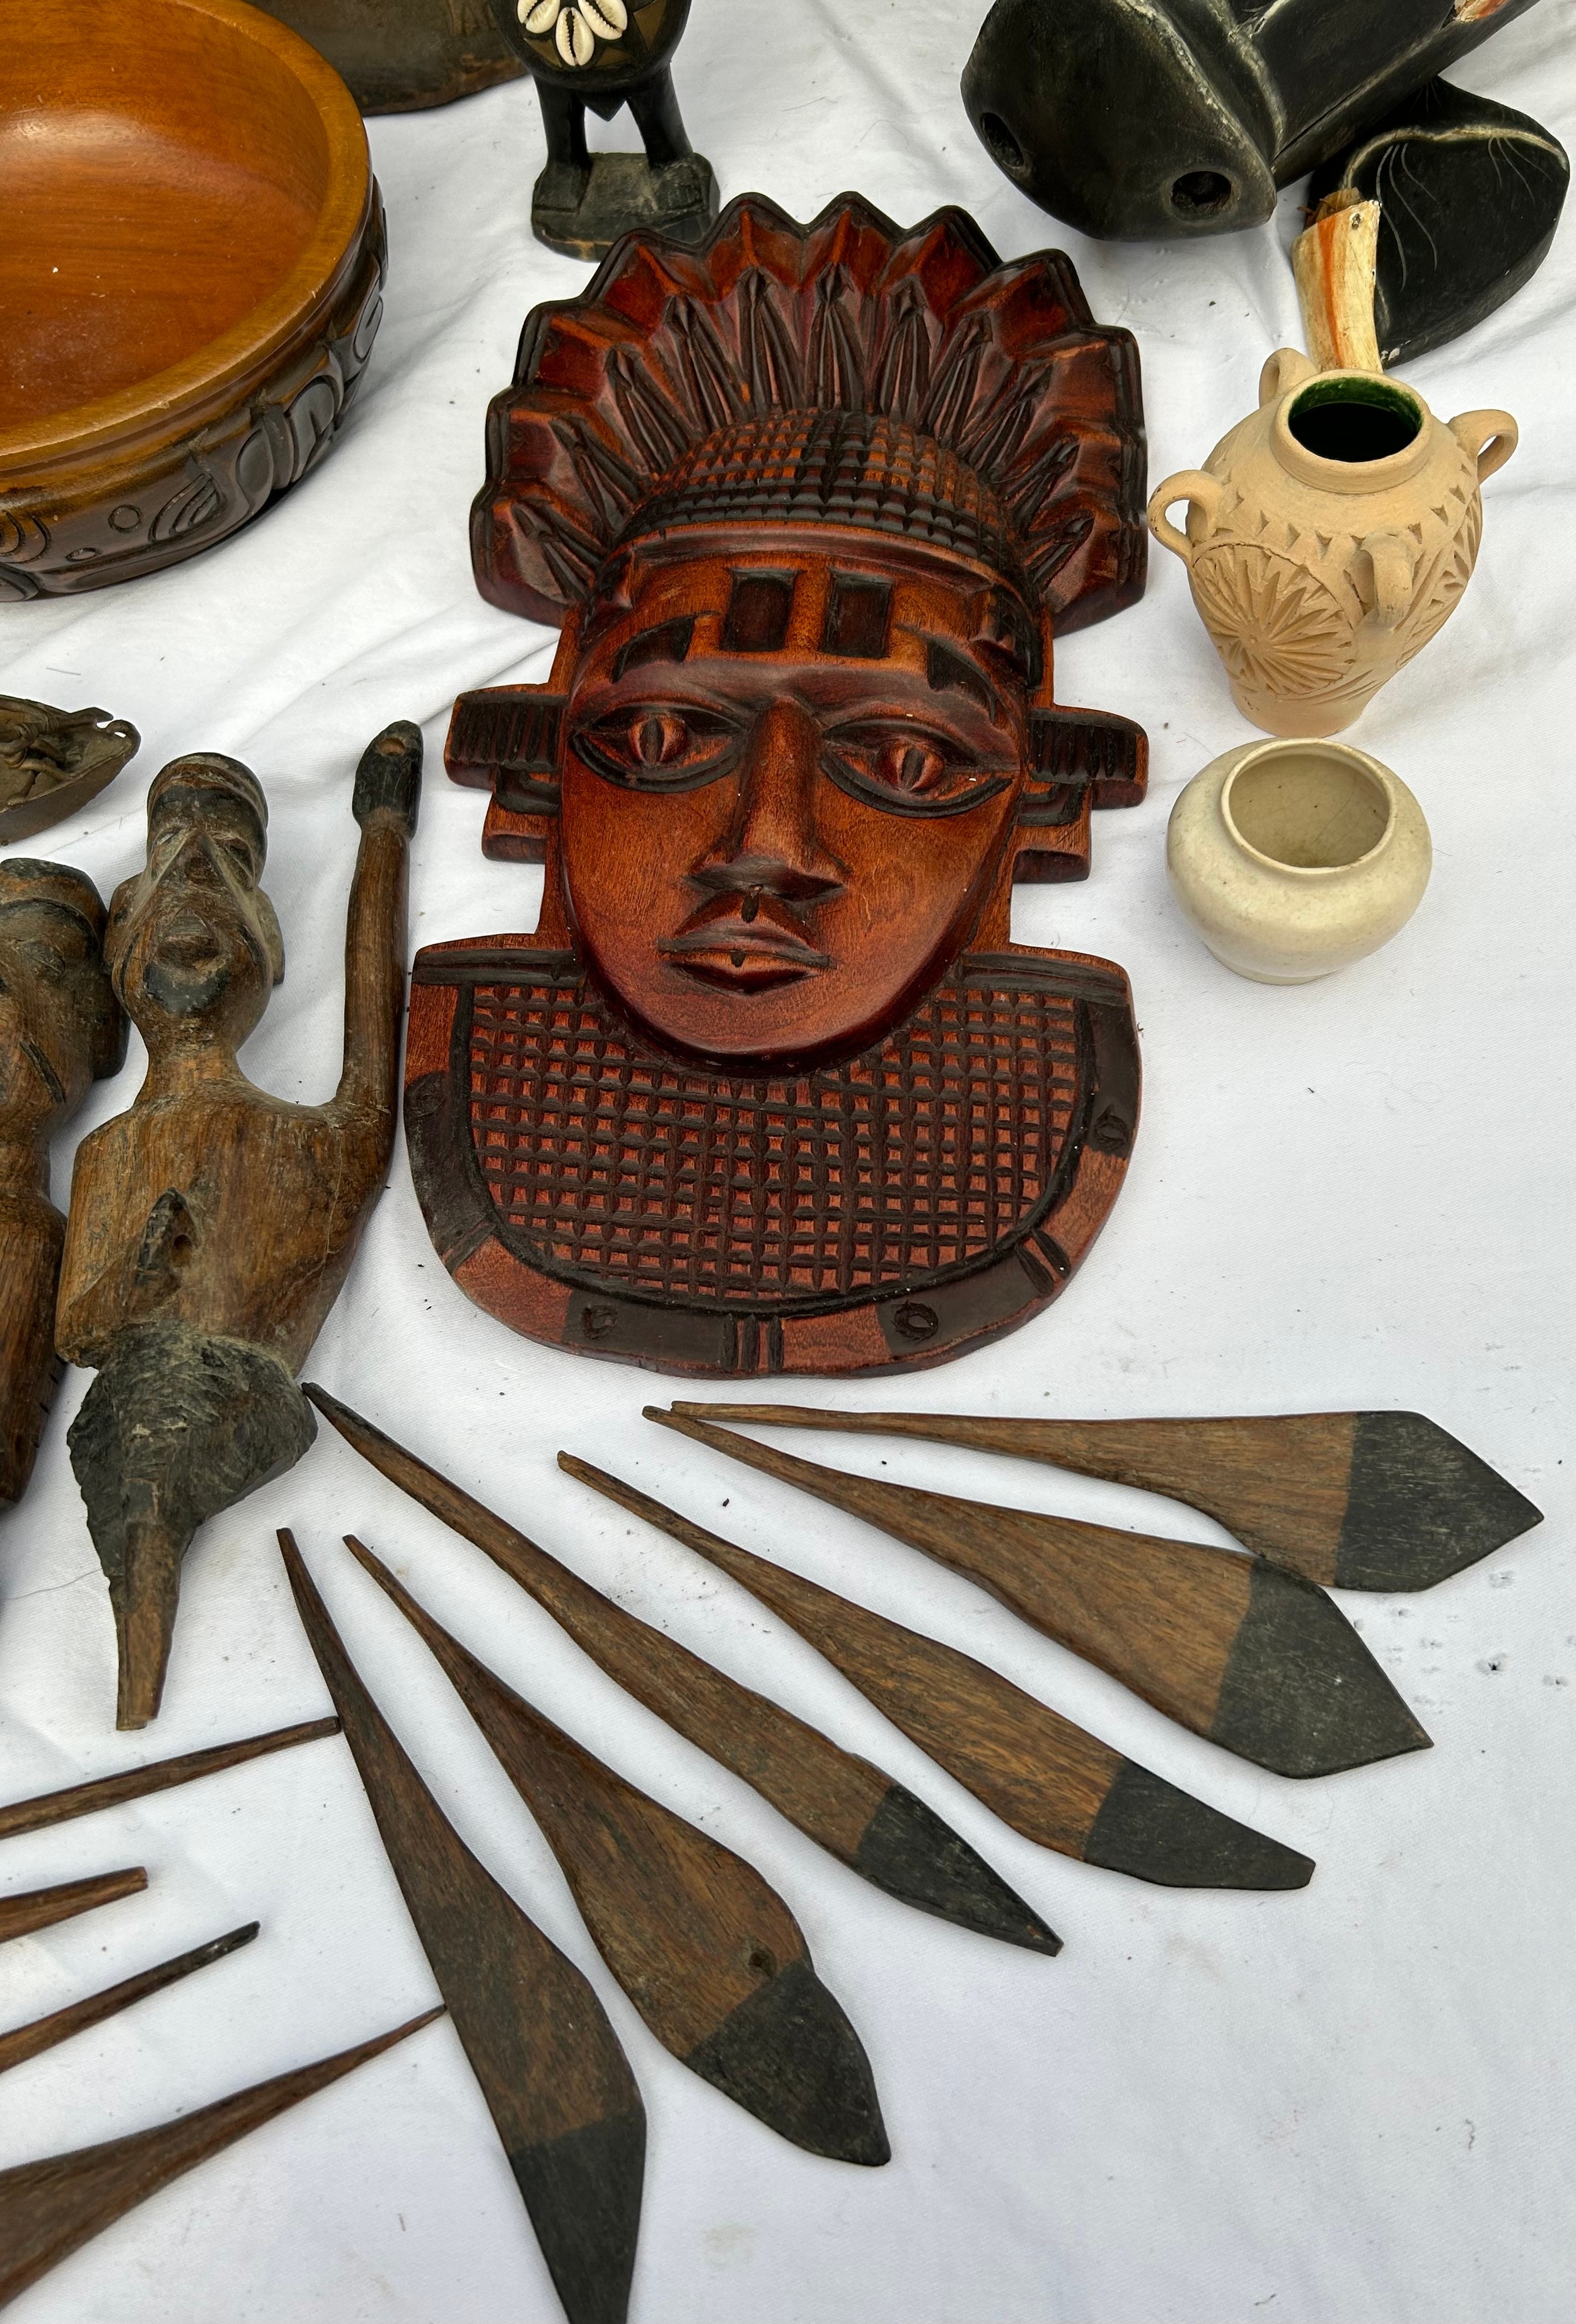 An unusual lot of tribal wooden items to include a wooden painted boar, wooden figures and mask wall - Bild 3 aus 5